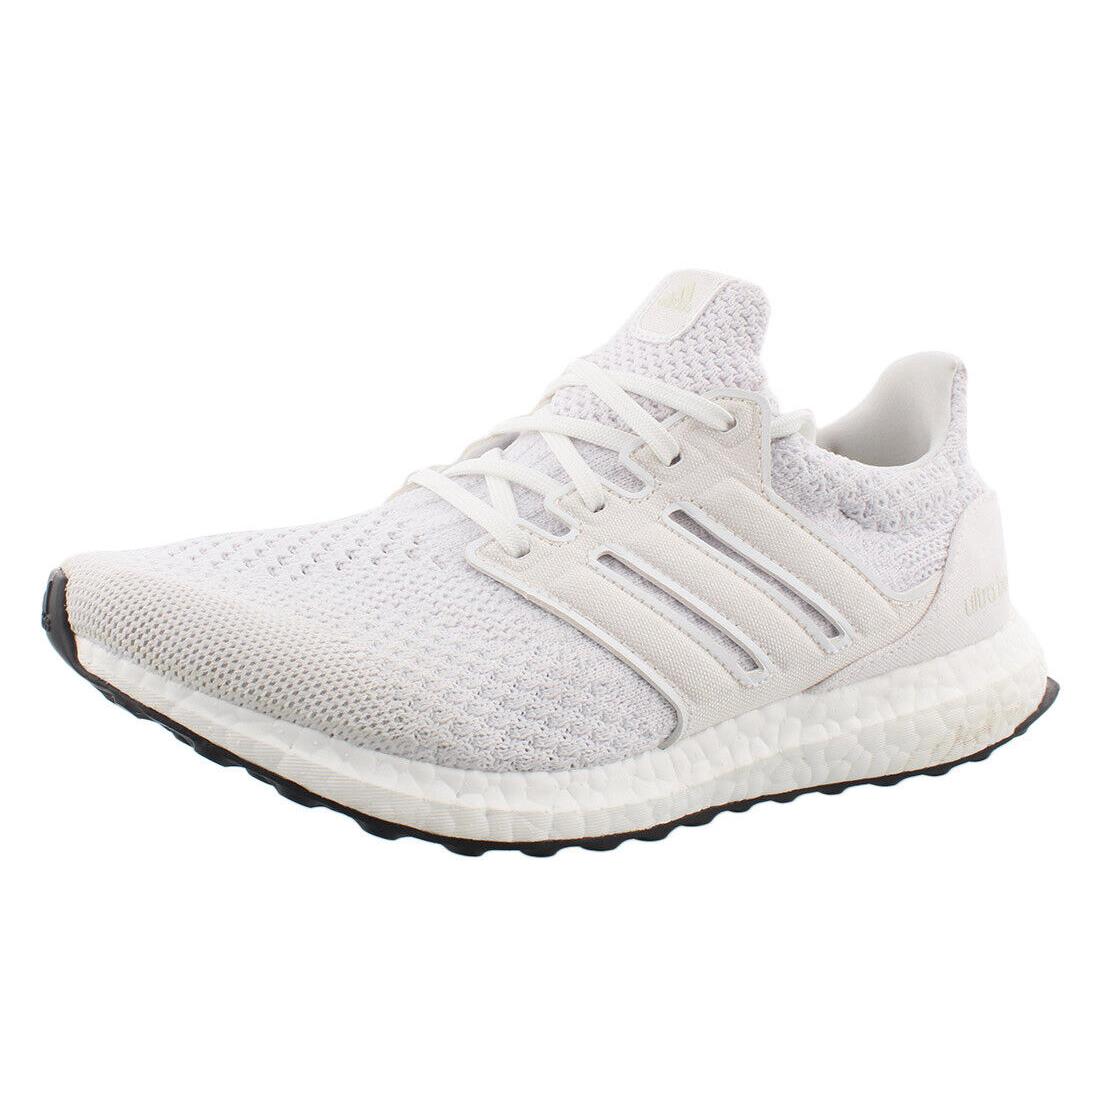 Adidas Ultraboost Dna Womens Shoes - Grey/White, Main: Grey